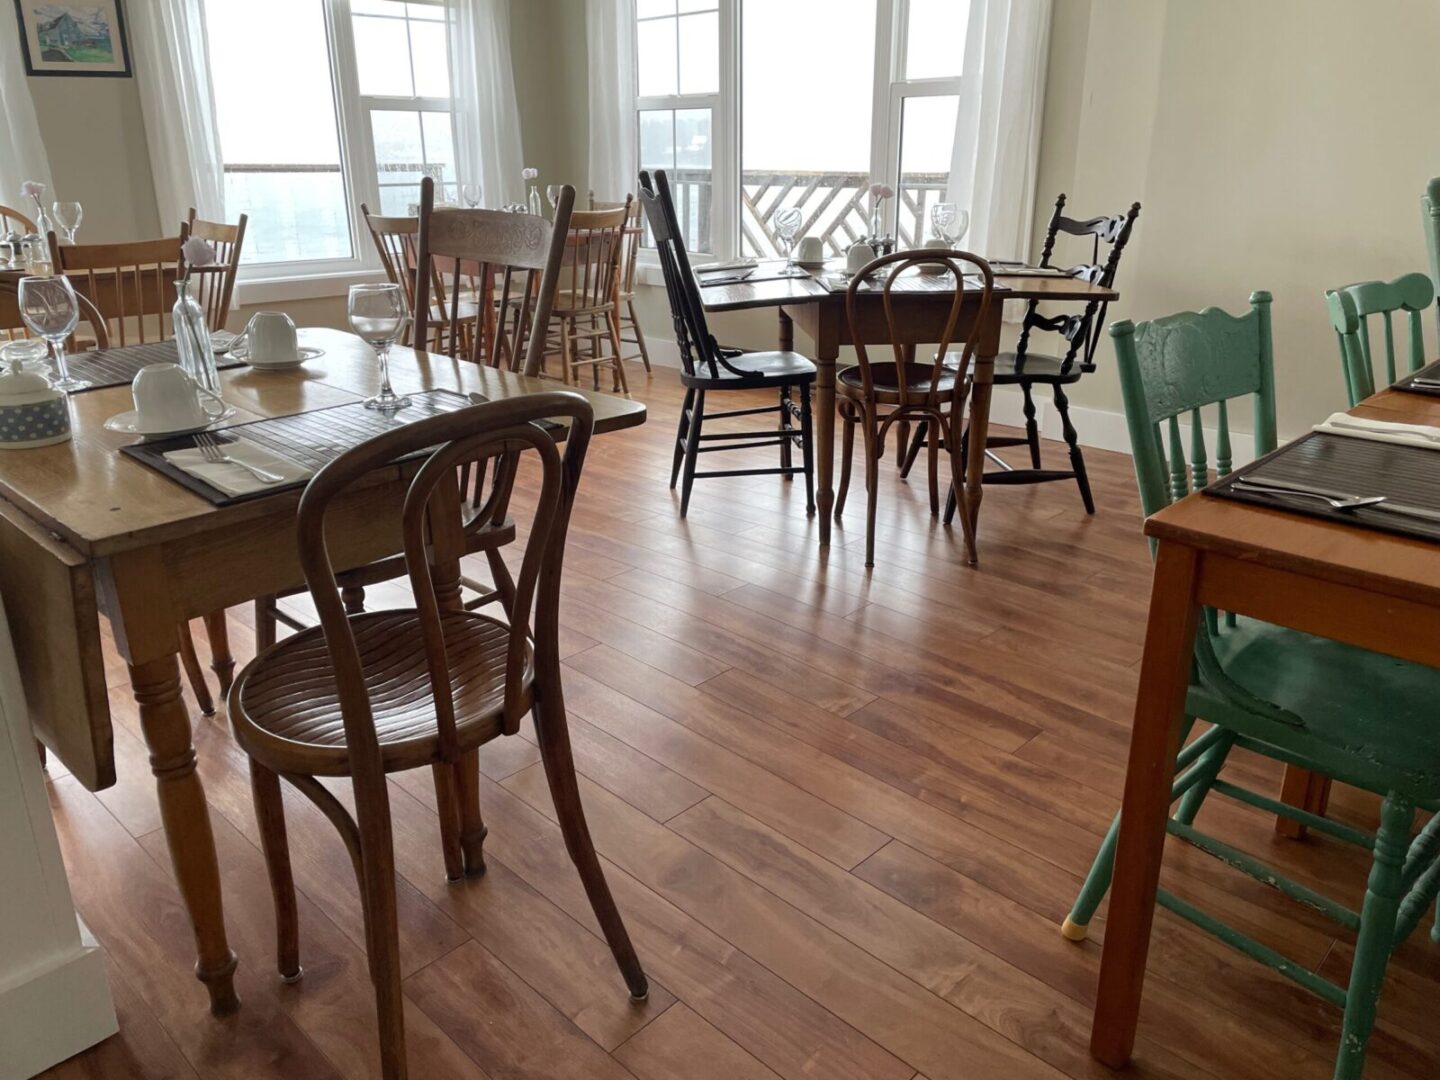 A dining room with tables and chairs on a wooden floor.